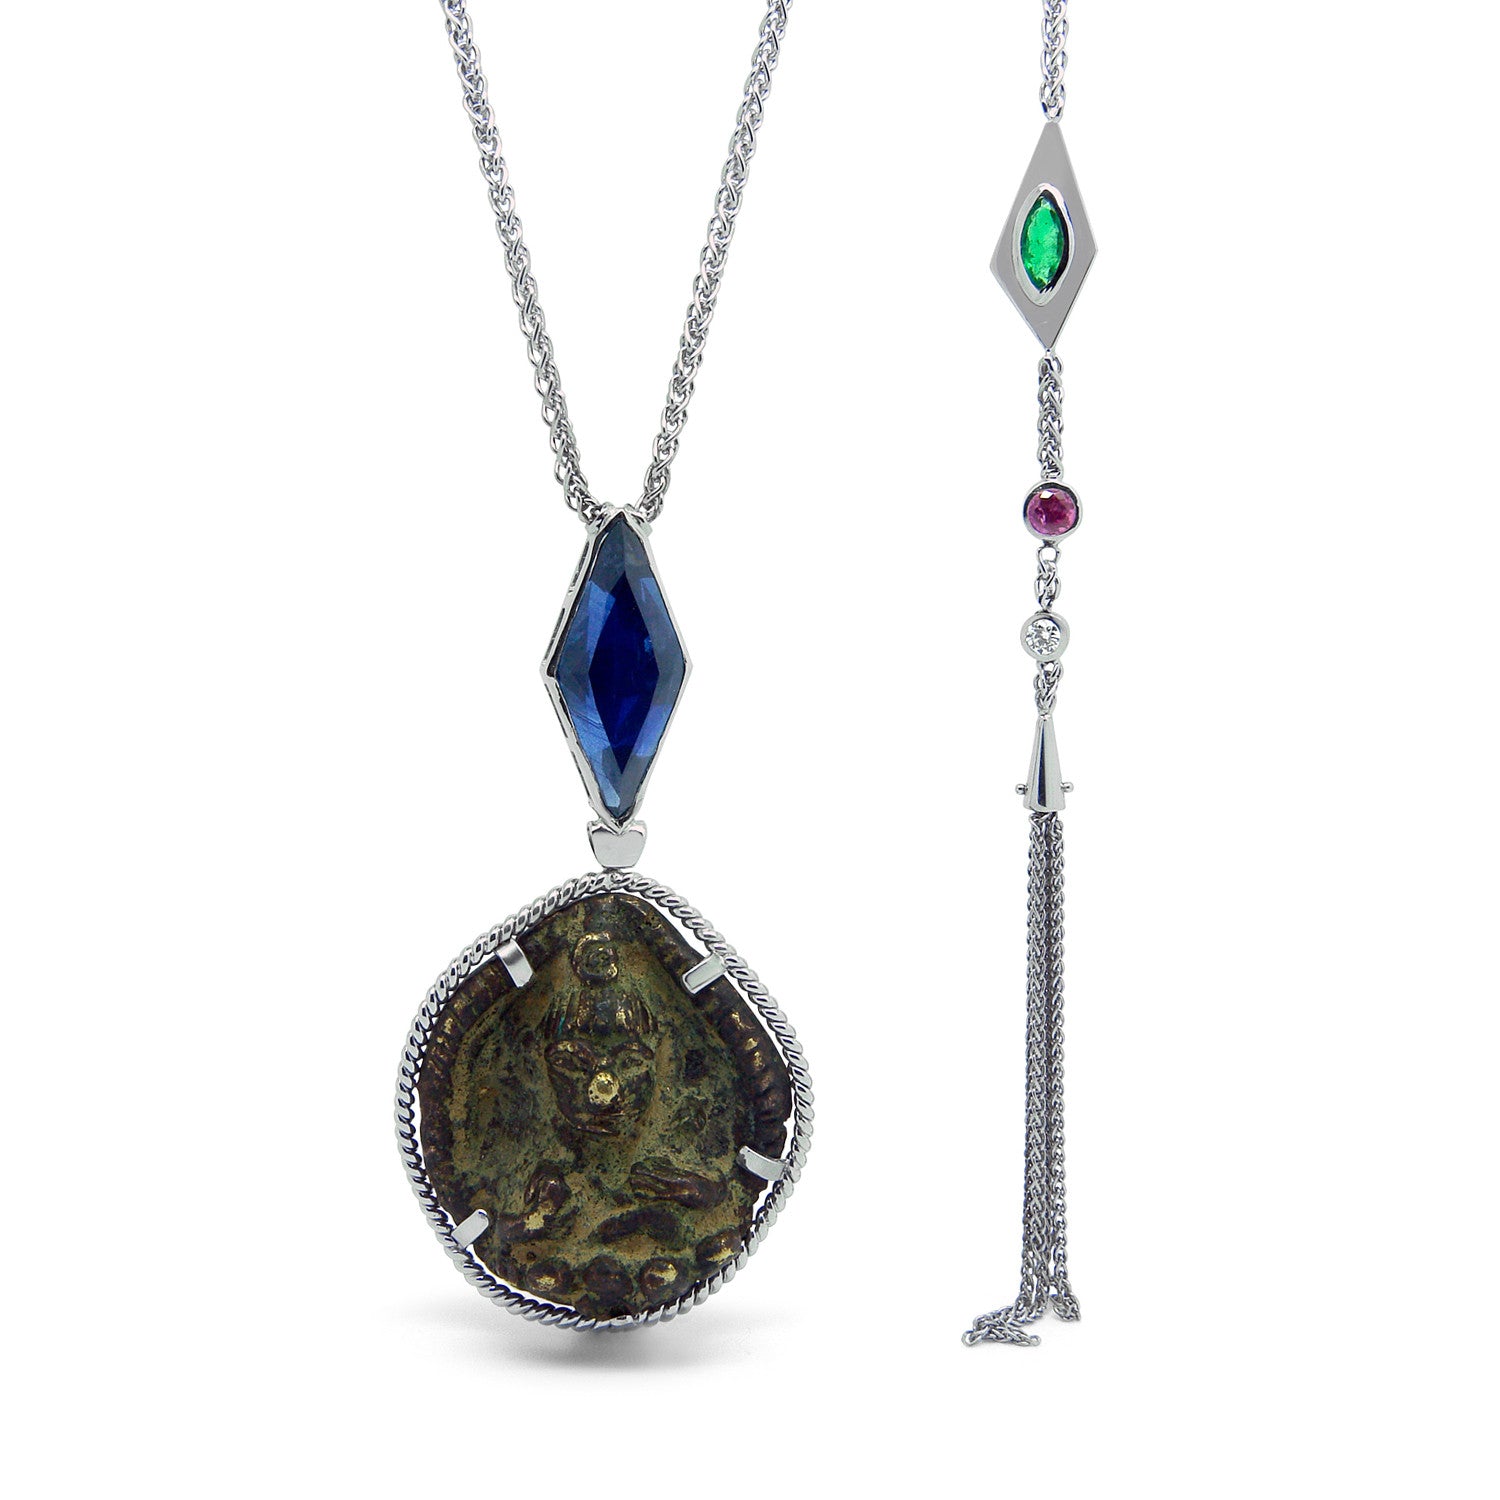 Bespoke James amulet pendant - 18ct white gold and fair-traded sapphire, ruby and emerald